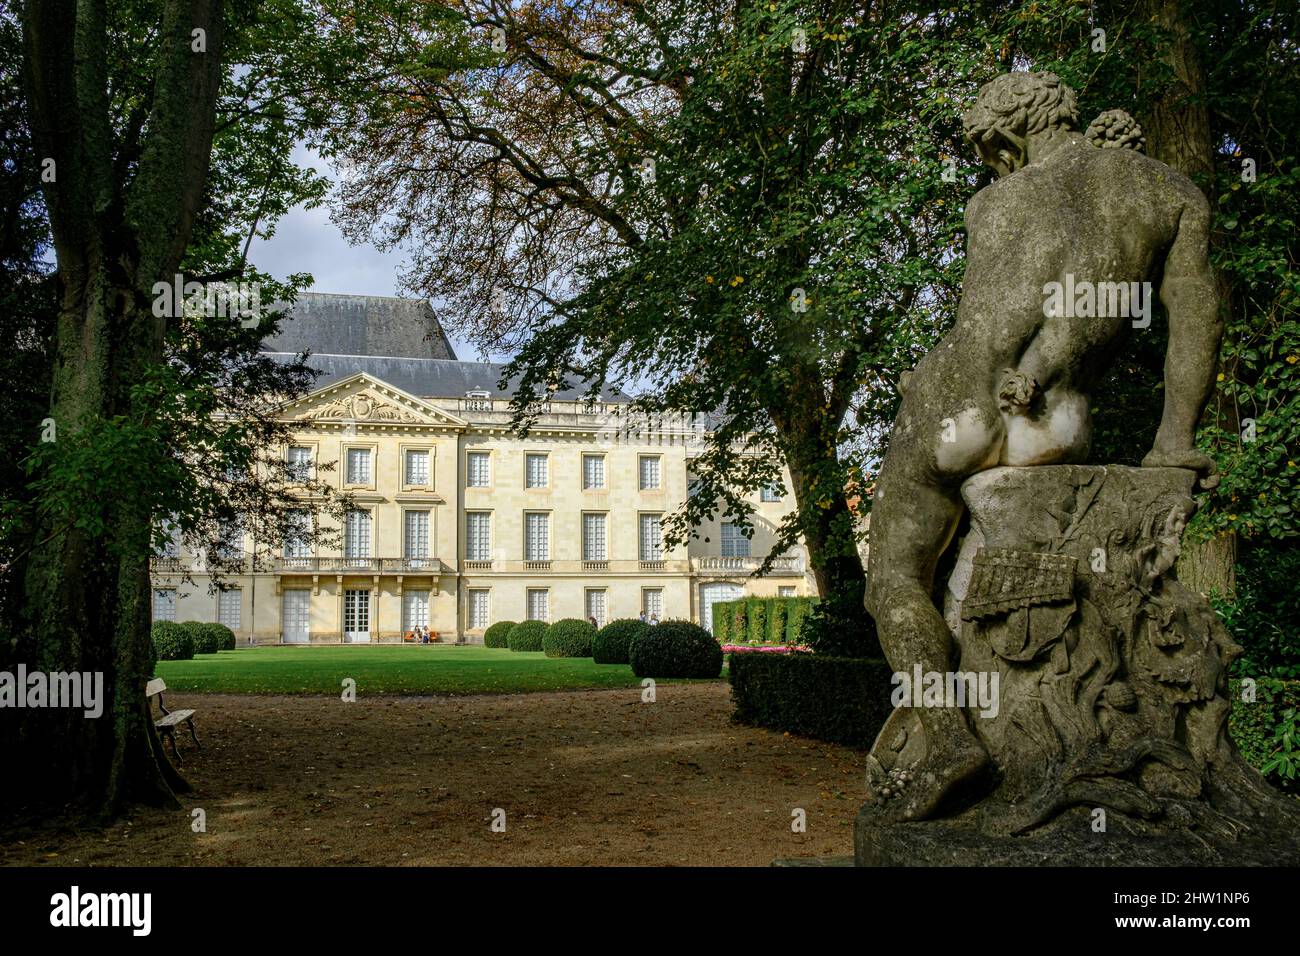 France, Indre et Loire, Loire valley, Tours, the Bishops Palace and the Fine arts museum, Renaissance style Stock Photo